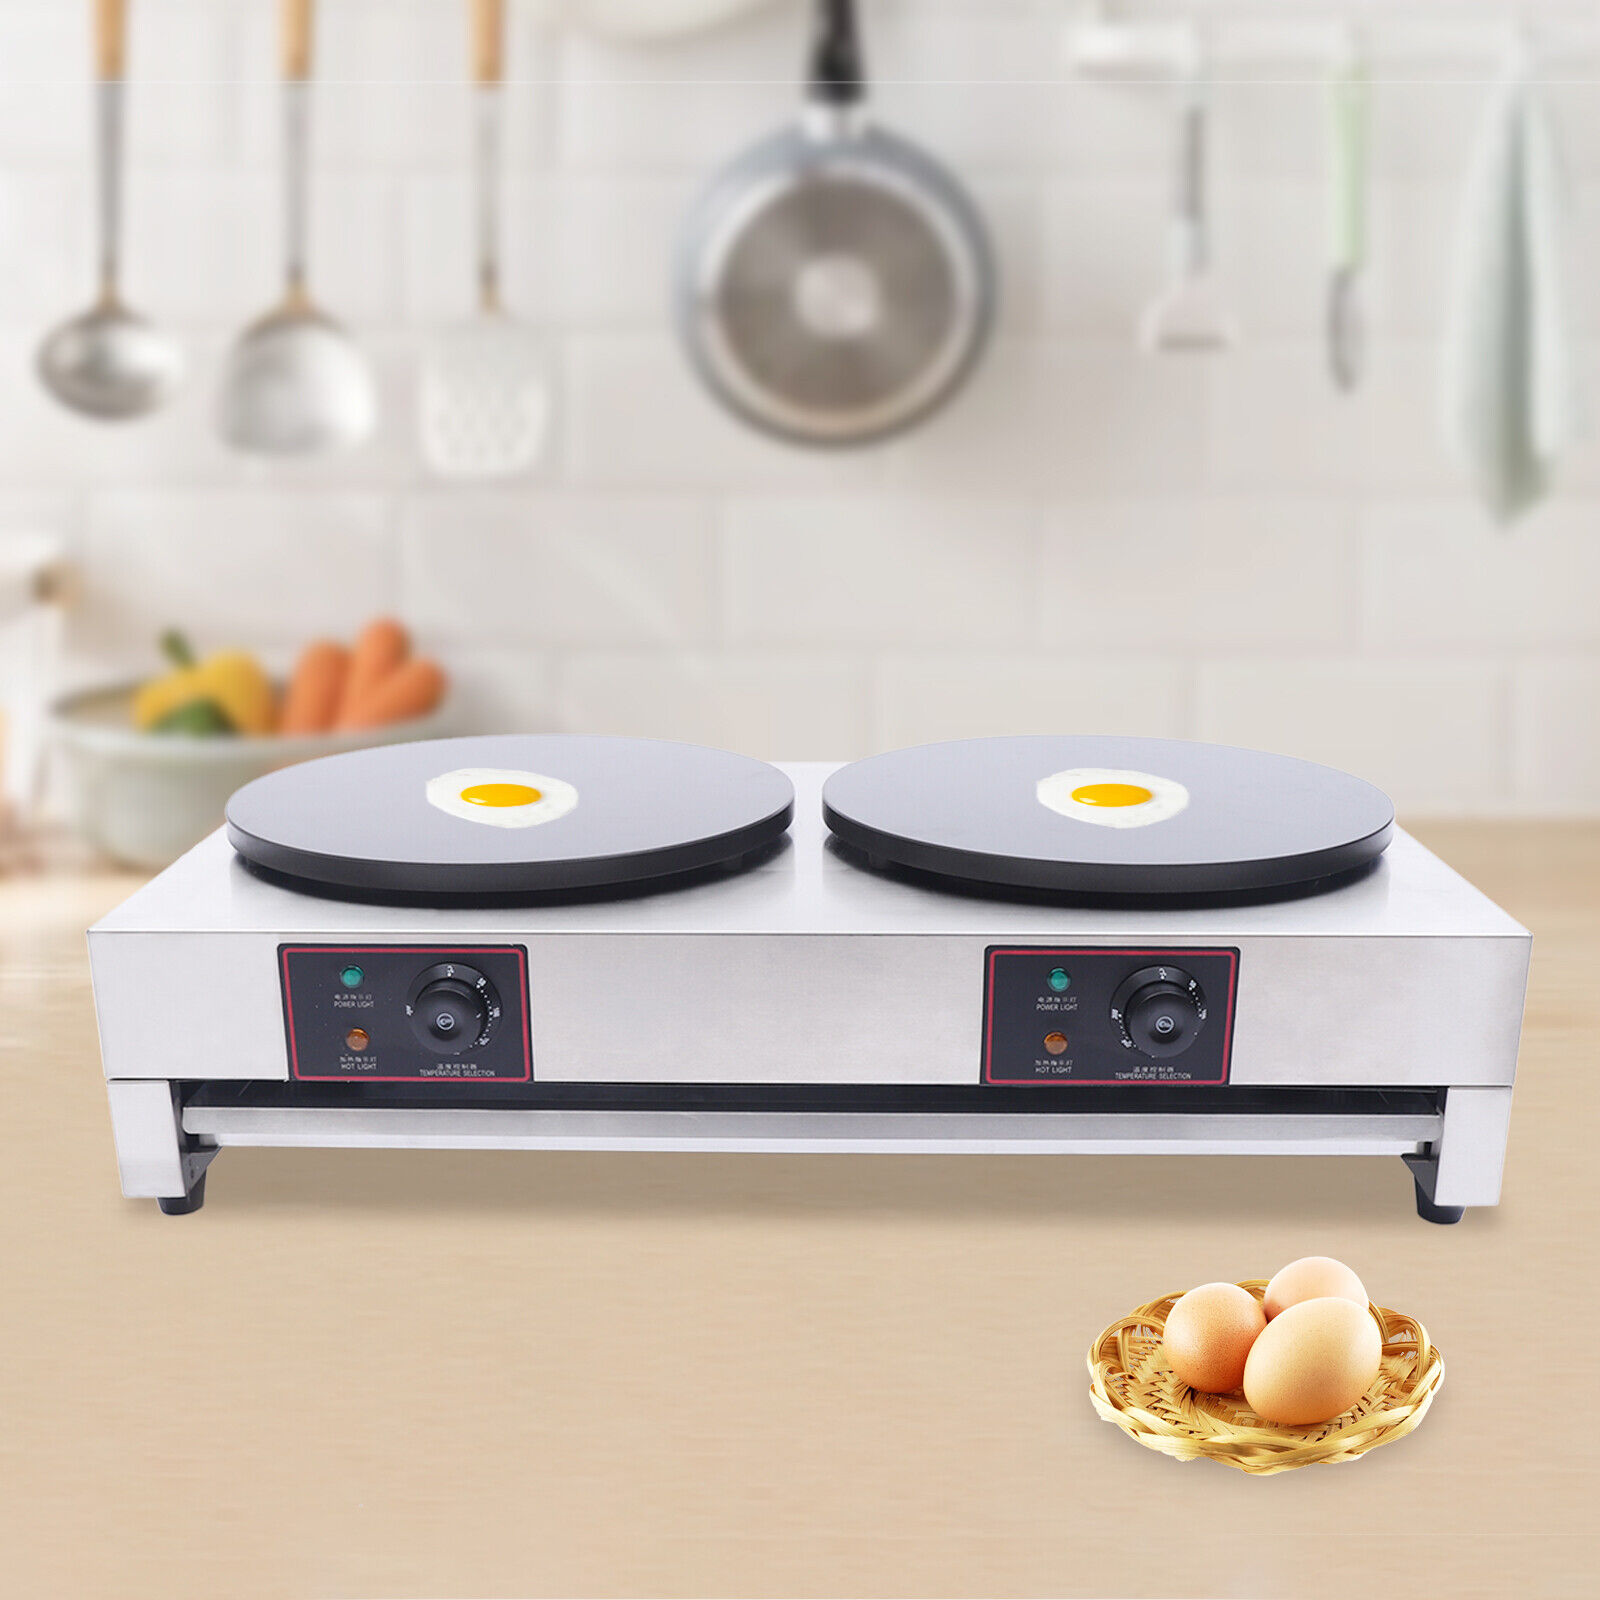 3kw+3kw 40cm 16" Commercial Double Pancake Maker Luxury Electric Crepe Unbranded Does Not Apply - фотография #19